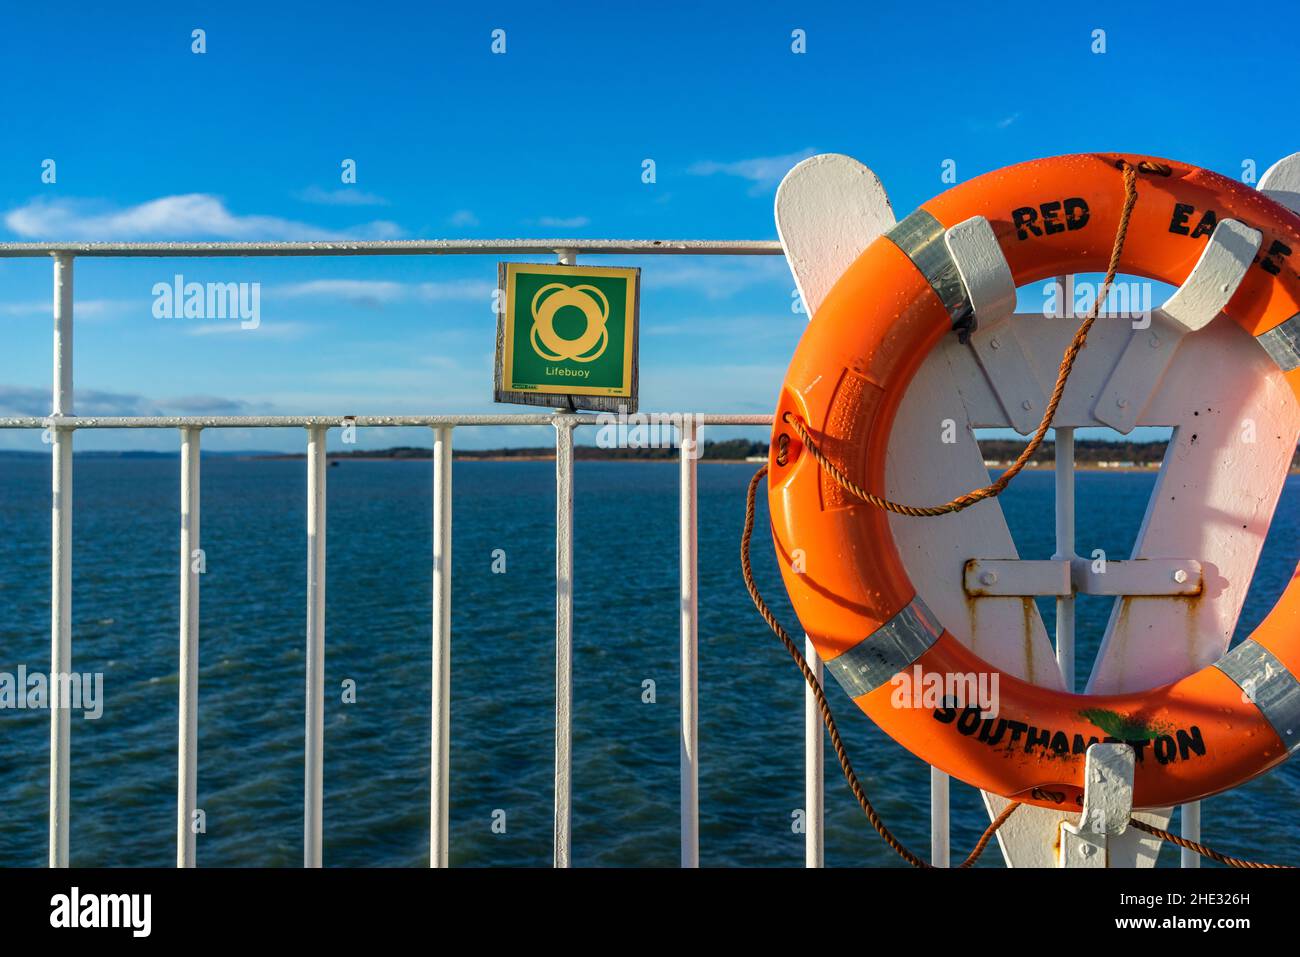 Orange lifebuoy with sign next to it onboard of the Red Eagle (Red funnel) ferry in Southampton, England, UK Stock Photo